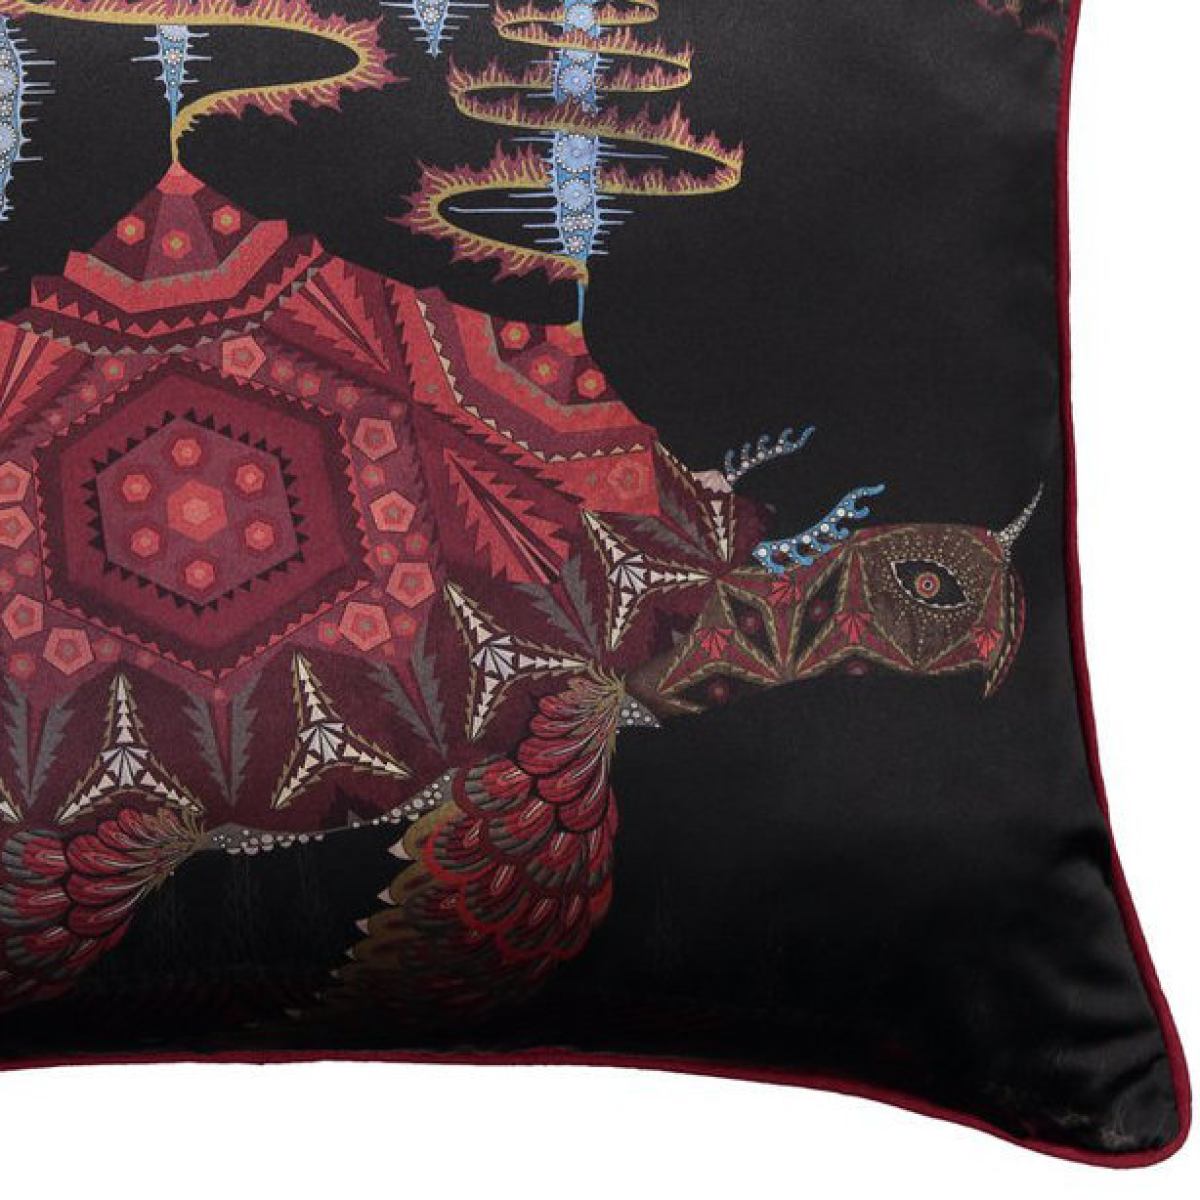 Linen Cushion "Cosmic Turtle" with Pure Silk Print